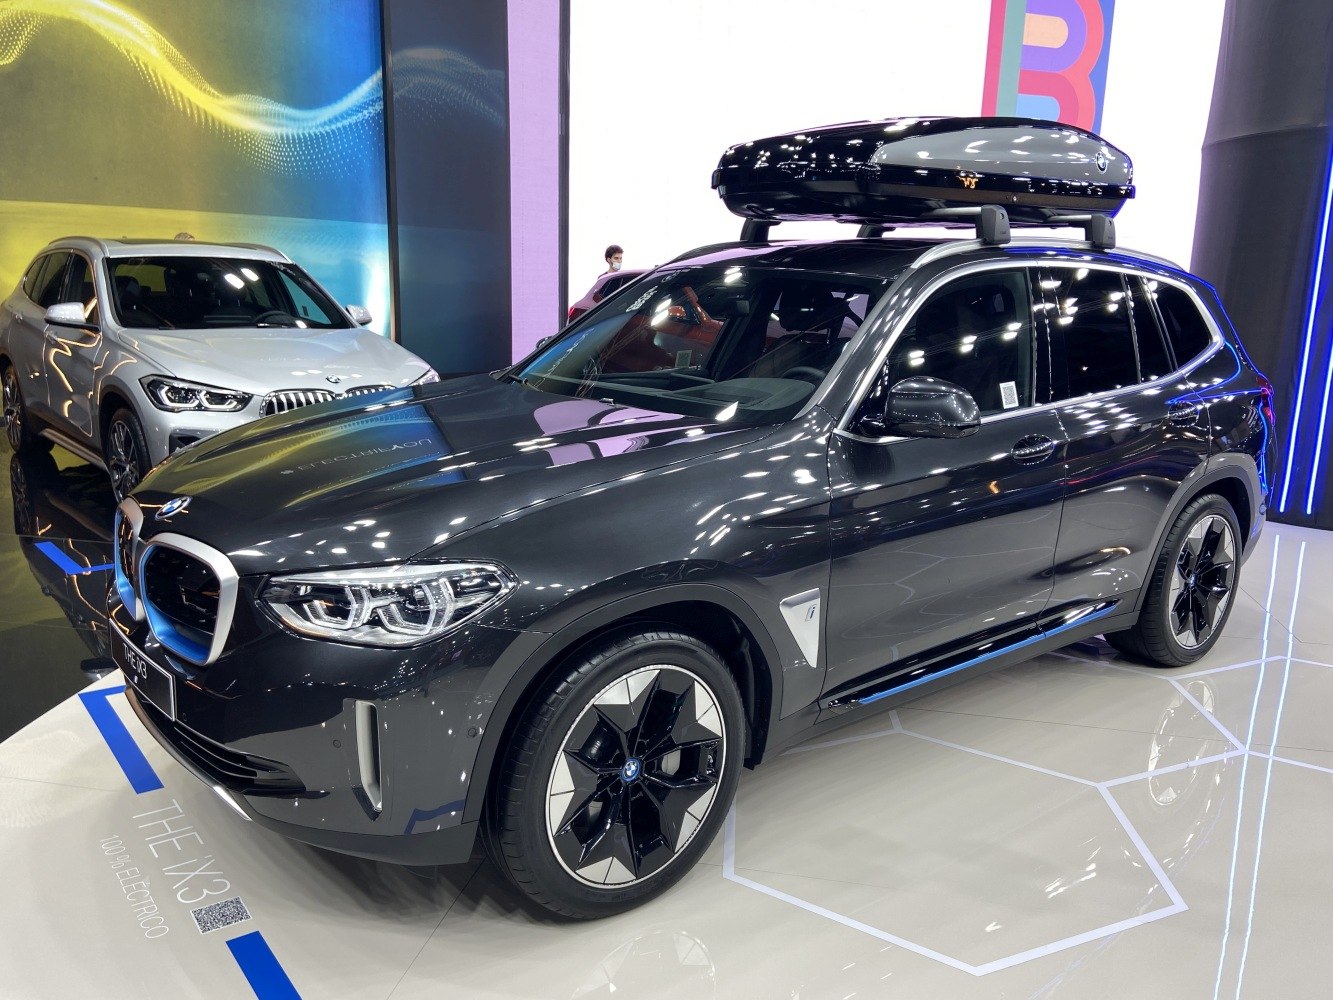 https://totalrenting.es/wp-content/uploads/2022/10/bmw-ix3-g08-2021-80-kwh-286-cv-suv.png